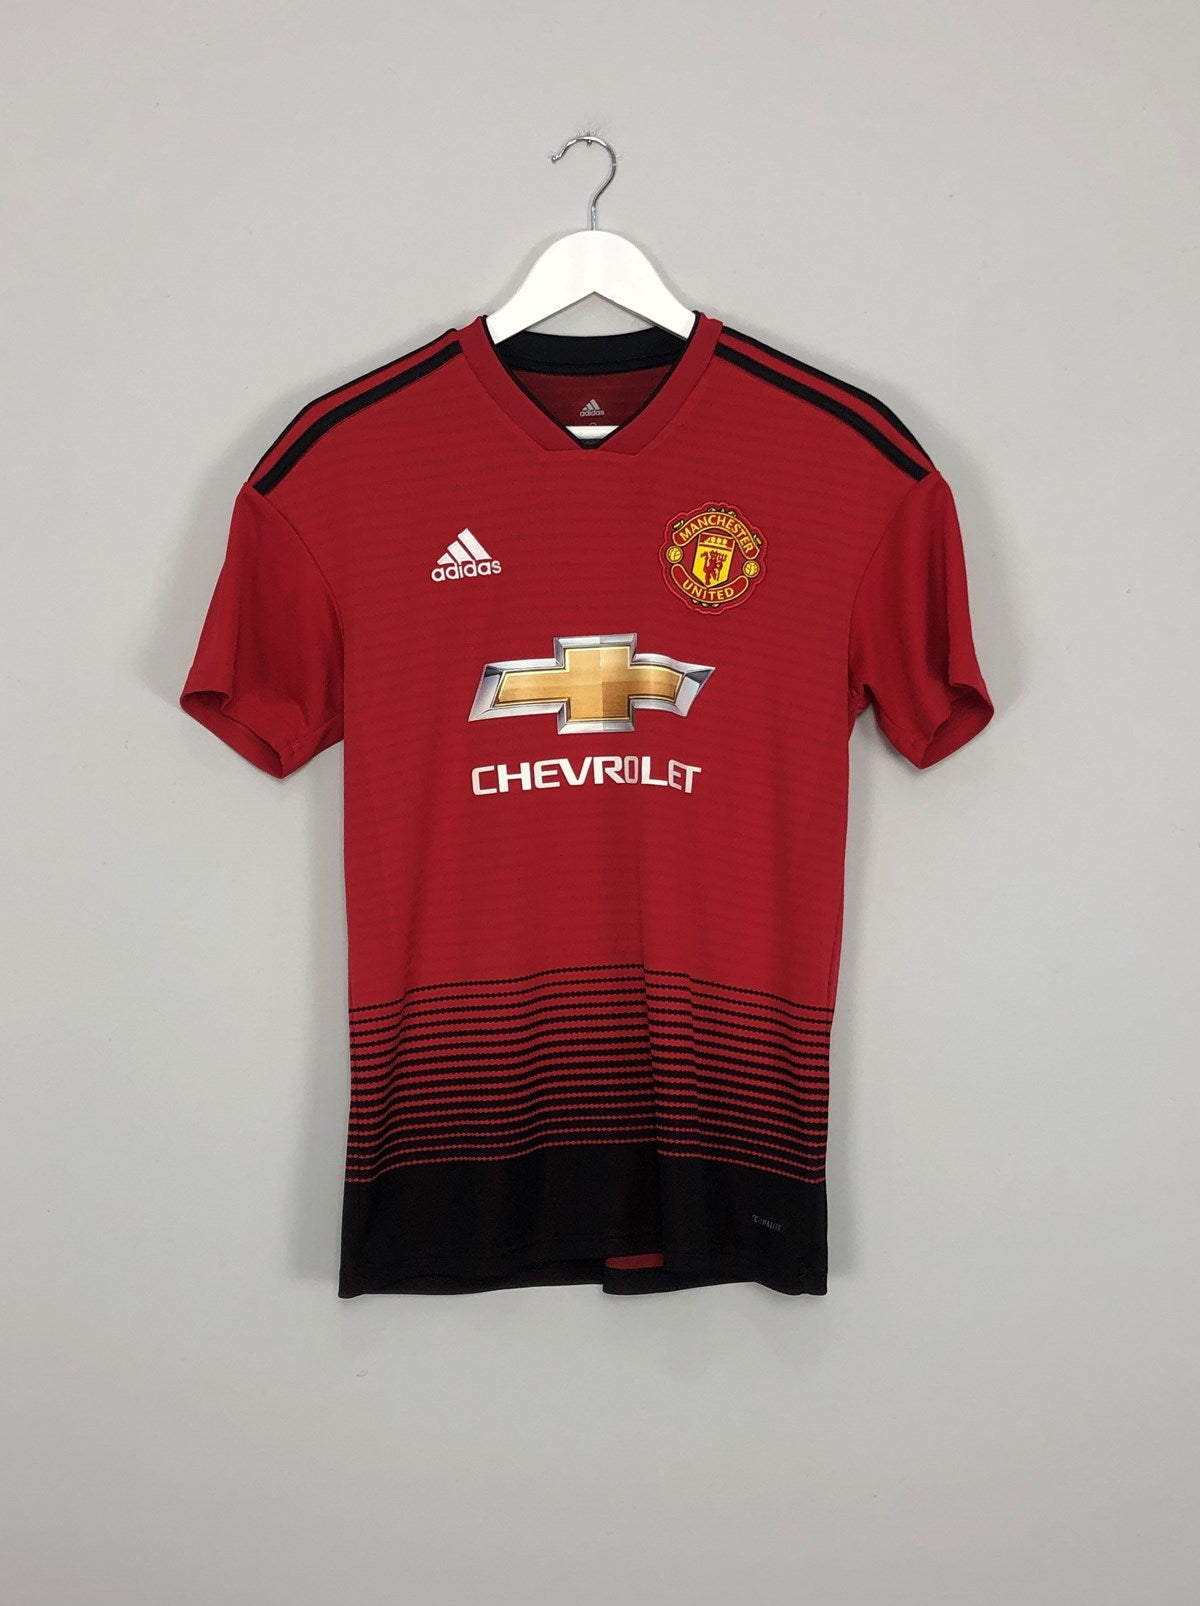 2018/19 MANCHESTER UNITED HOME SHIRT (S) ADIDAS